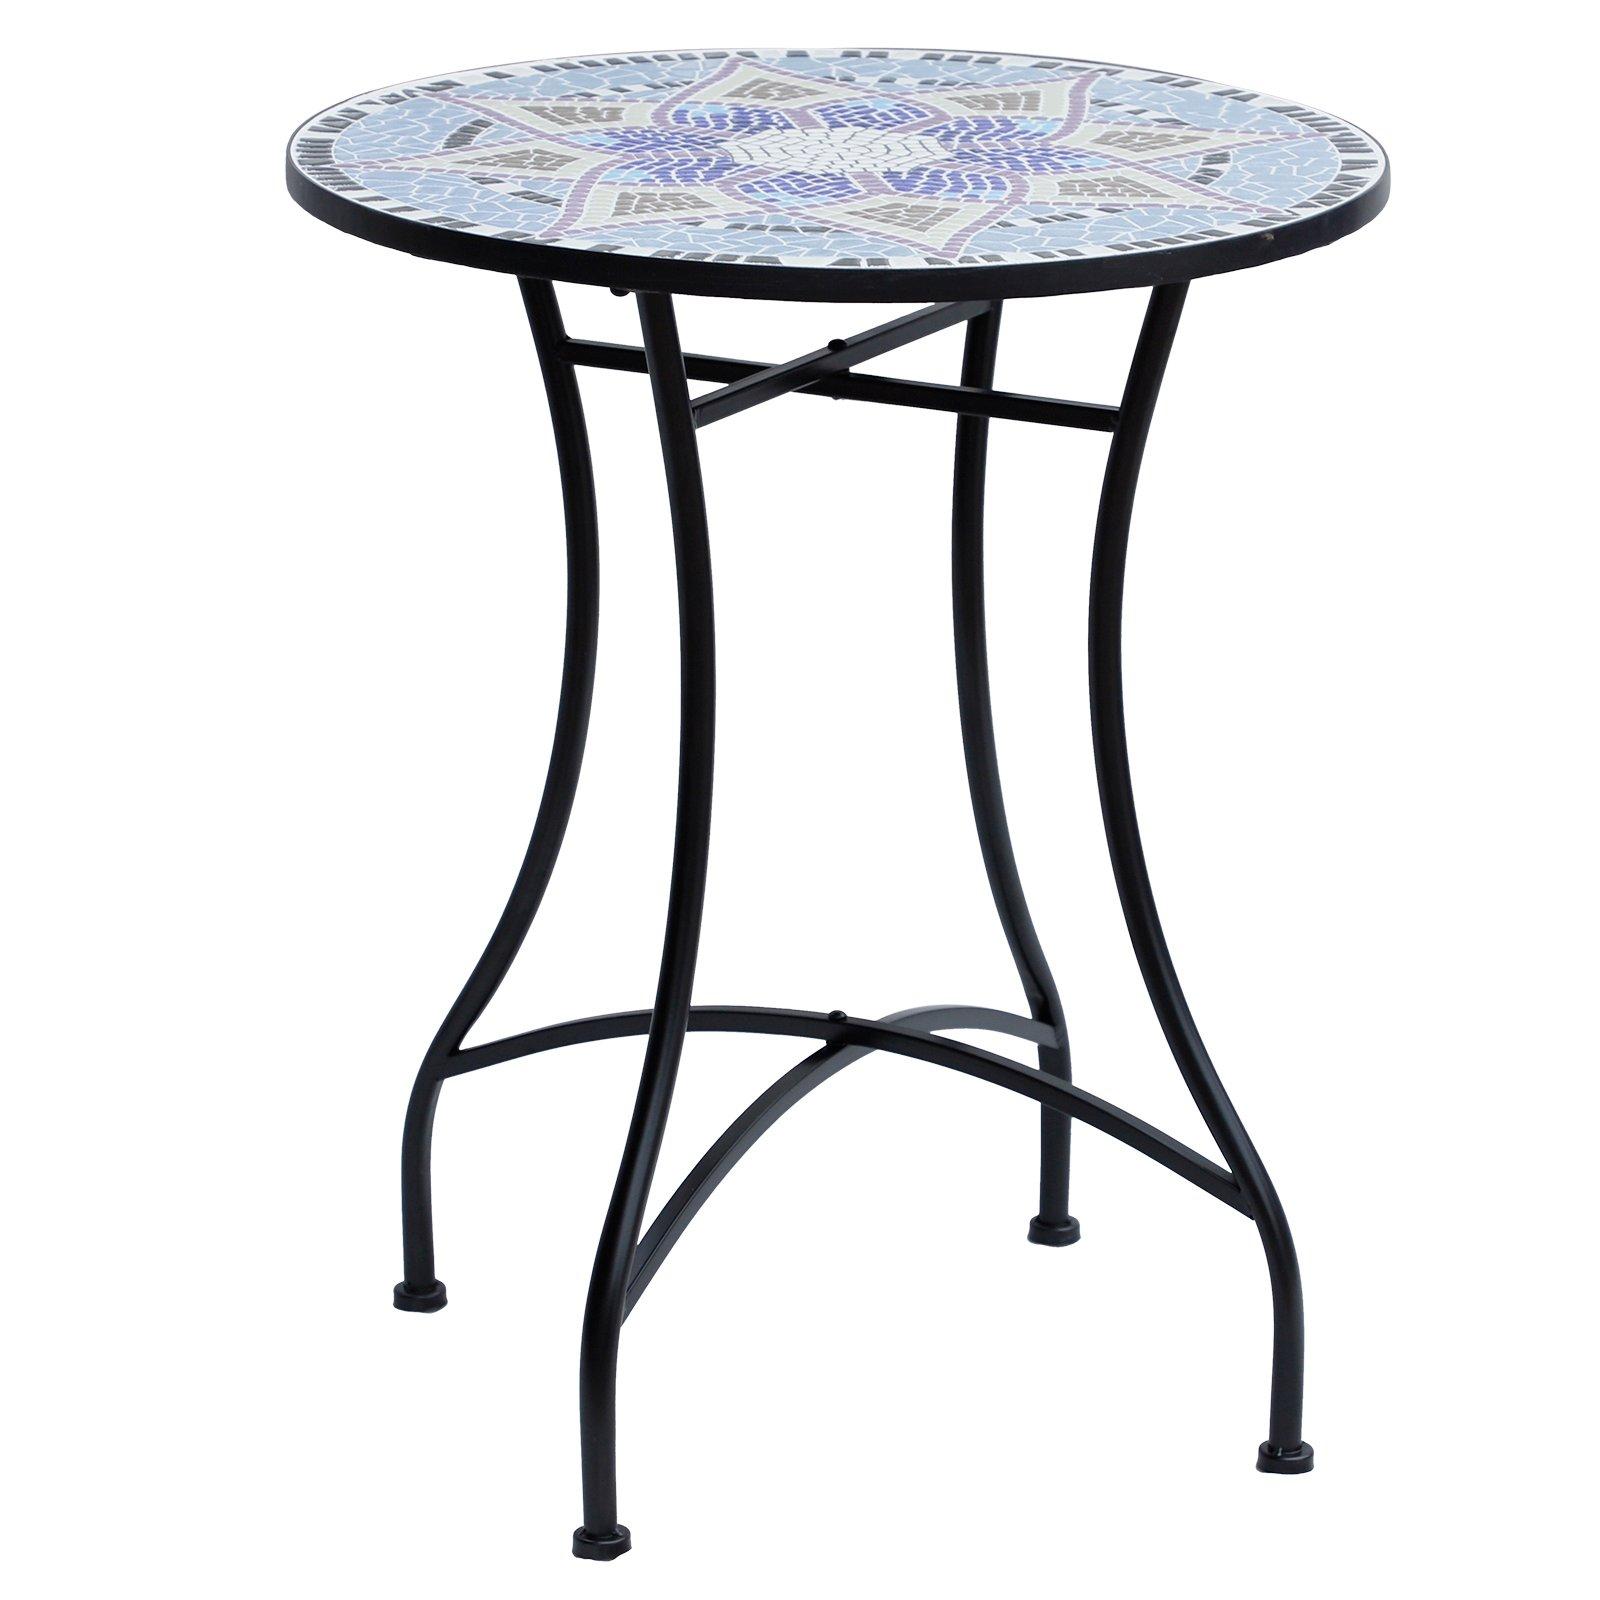 Garden Table, Mosaic Round Patio Side Table with 60cm Ceramic Top